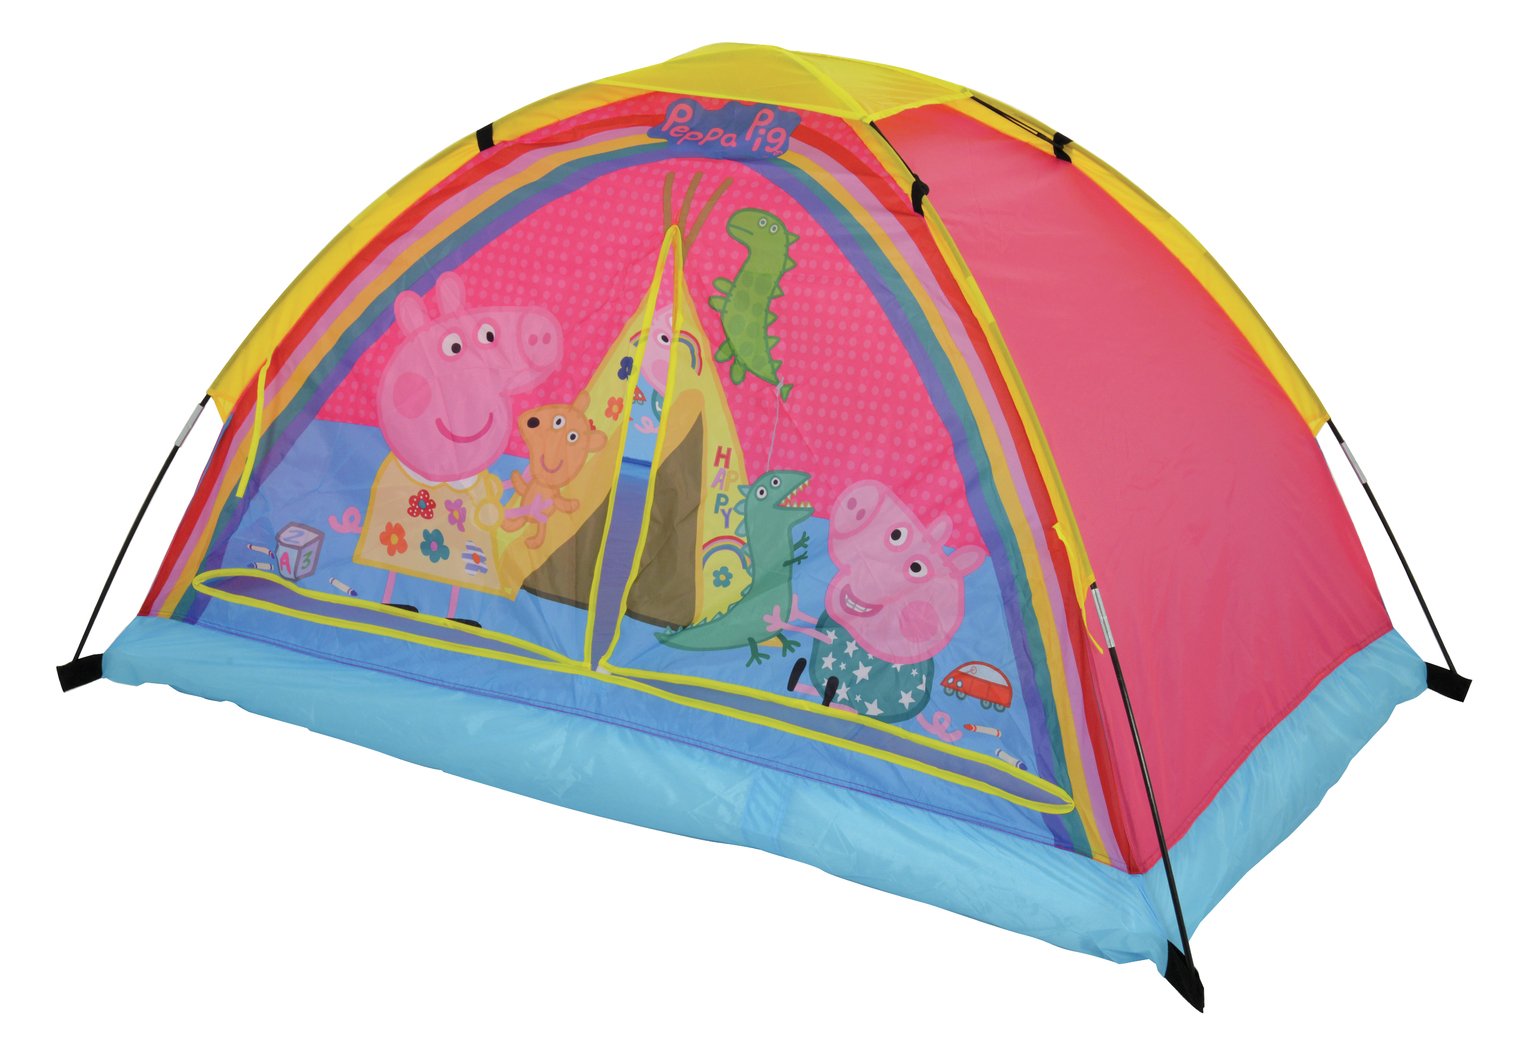 Peppa Pig Dream Den with Lights Review